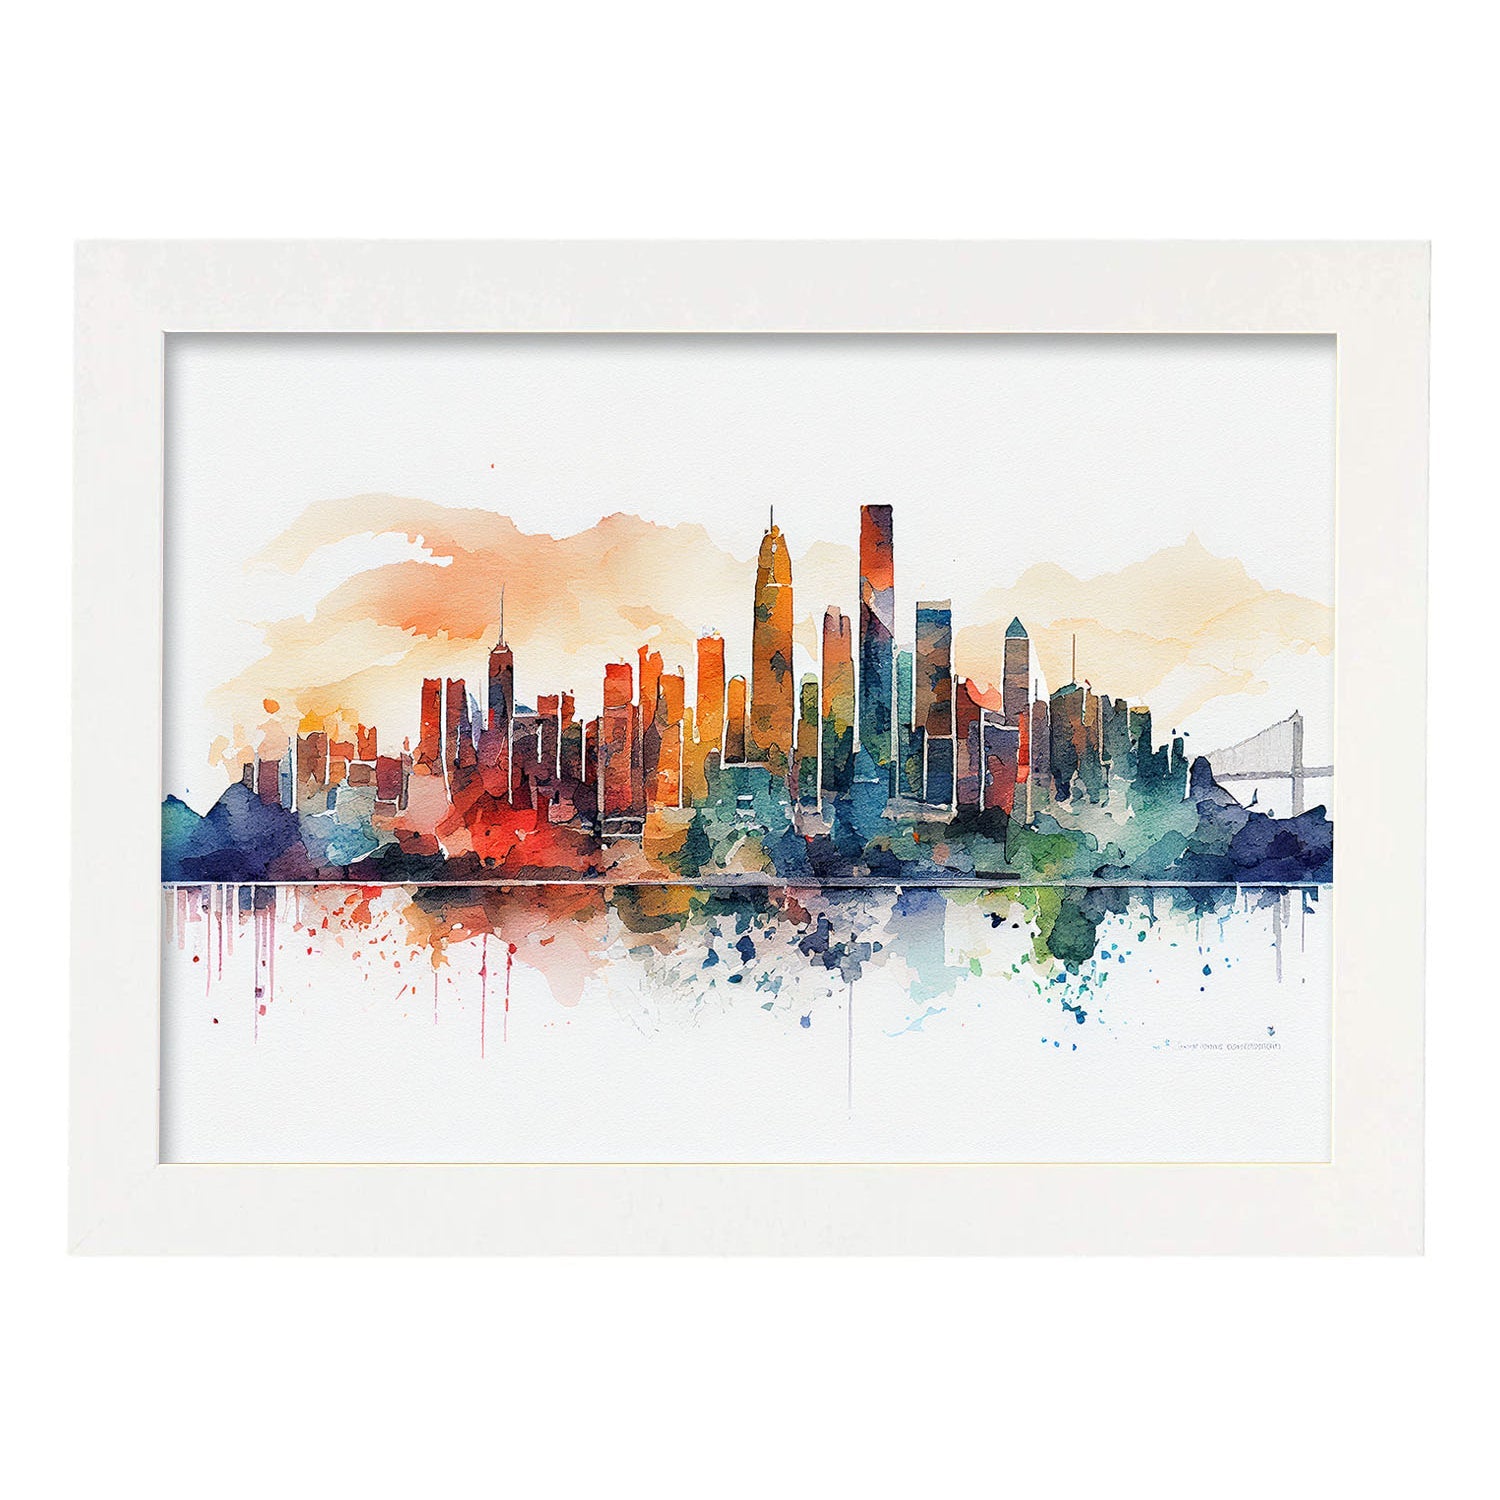 Nacnic watercolor of a skyline of the city of Hong Kong_1. Aesthetic Wall Art Prints for Bedroom or Living Room Design.-Artwork-Nacnic-A4-Marco Blanco-Nacnic Estudio SL